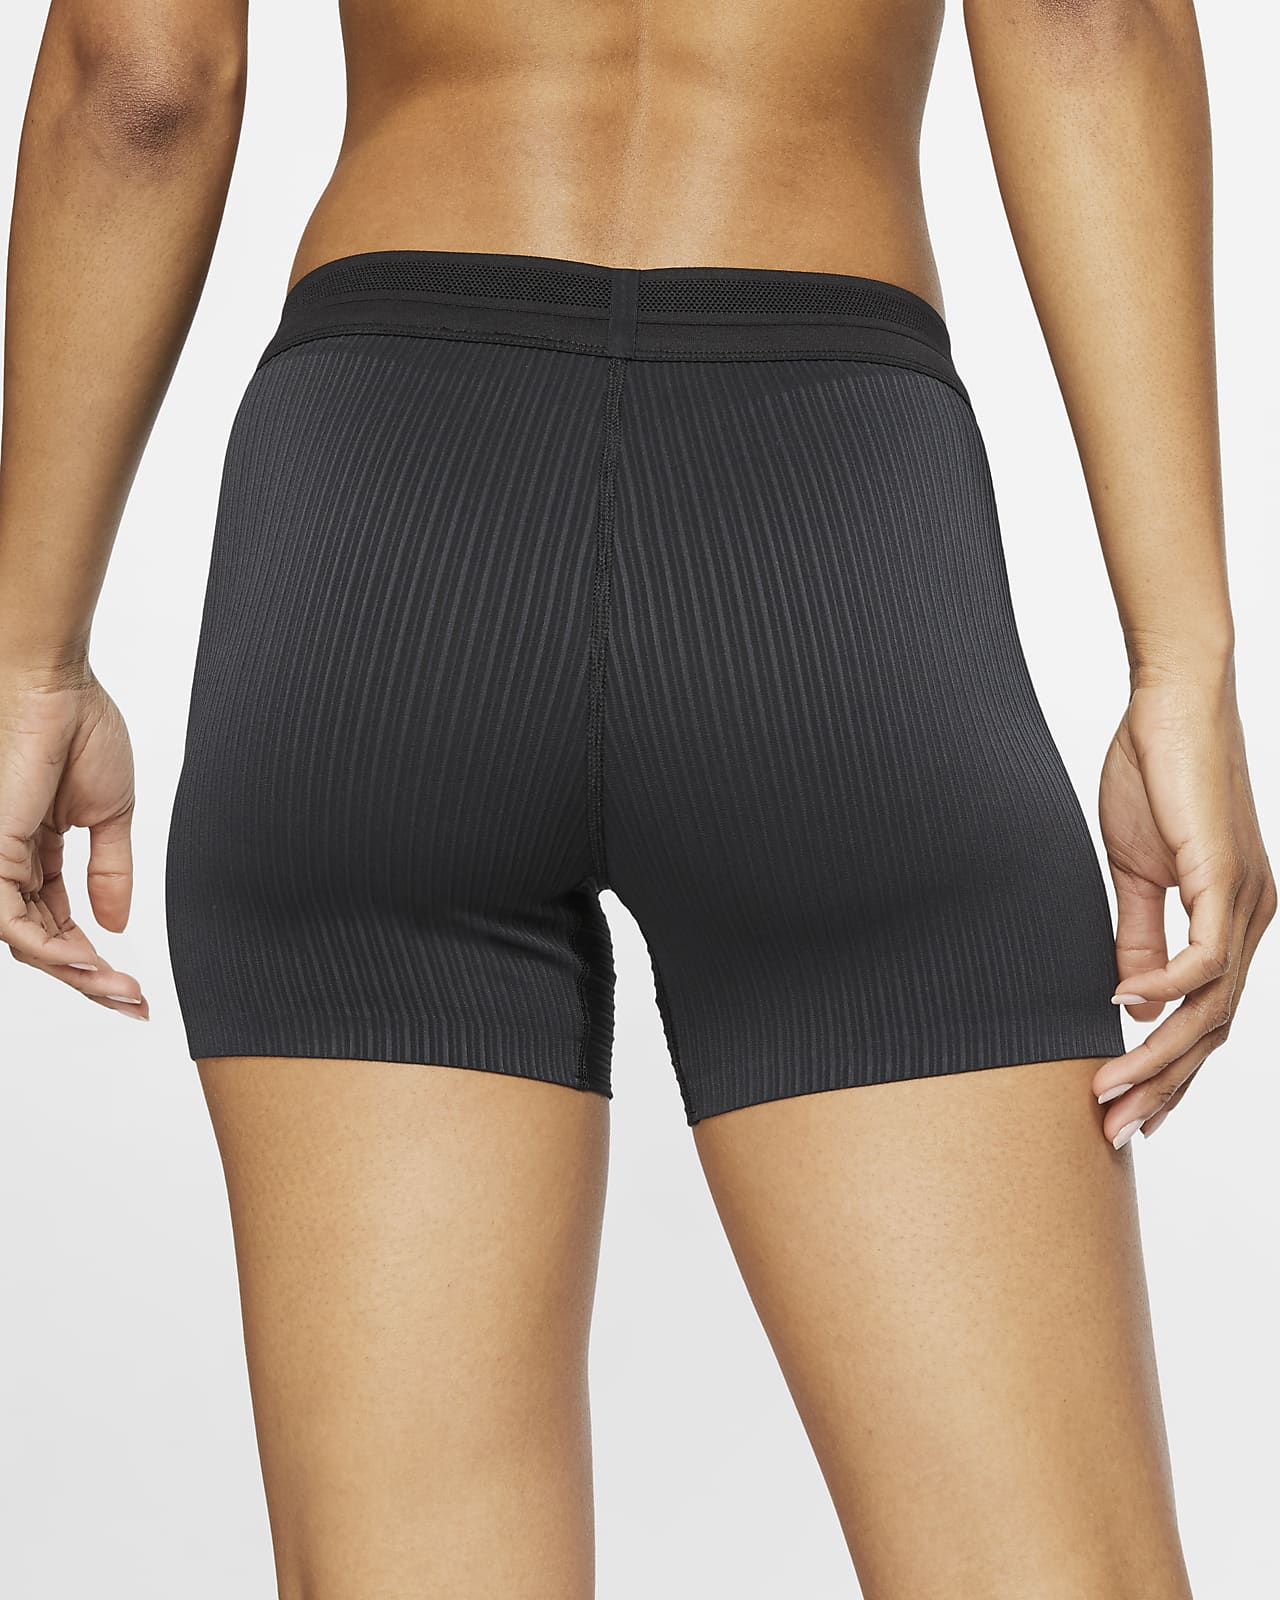 WOMEN'S Nike Running Dri Fit black shorts with built in underwear S SMALL